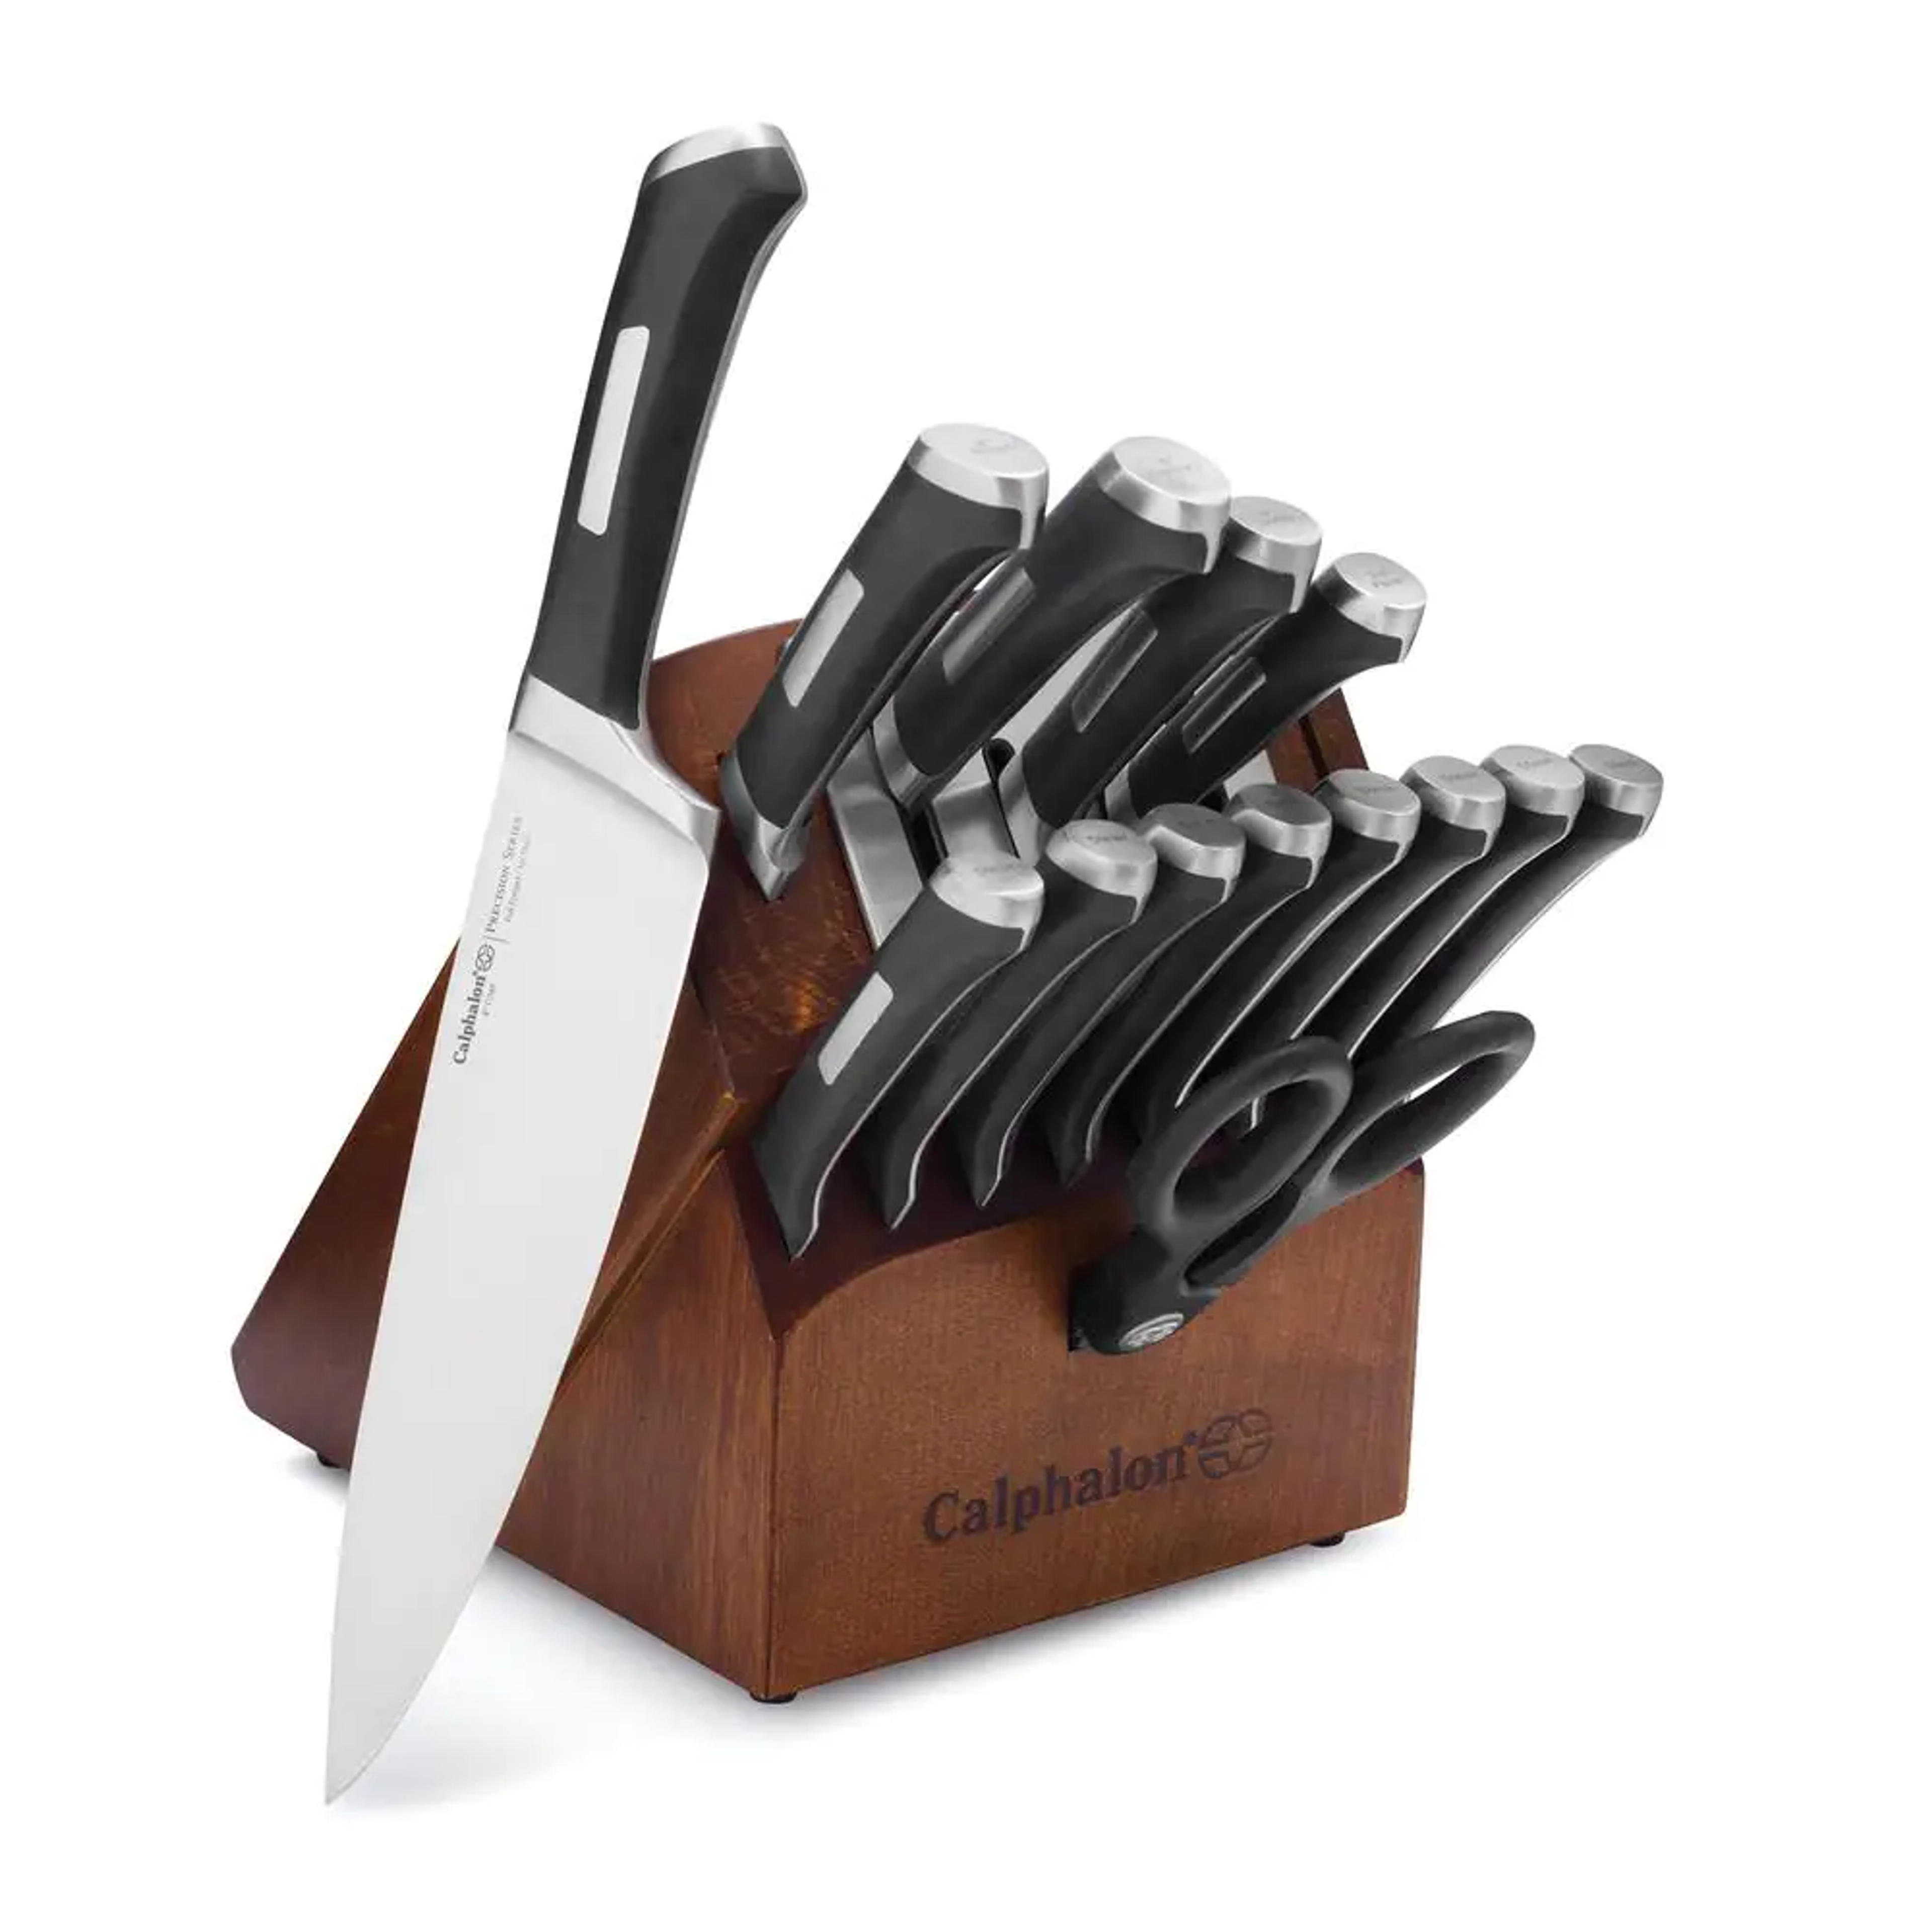 Calphalon Precision 15-Piece Self-Sharpening Knife and Block Set with Sharp in Technology 1932941 - The Home Depot